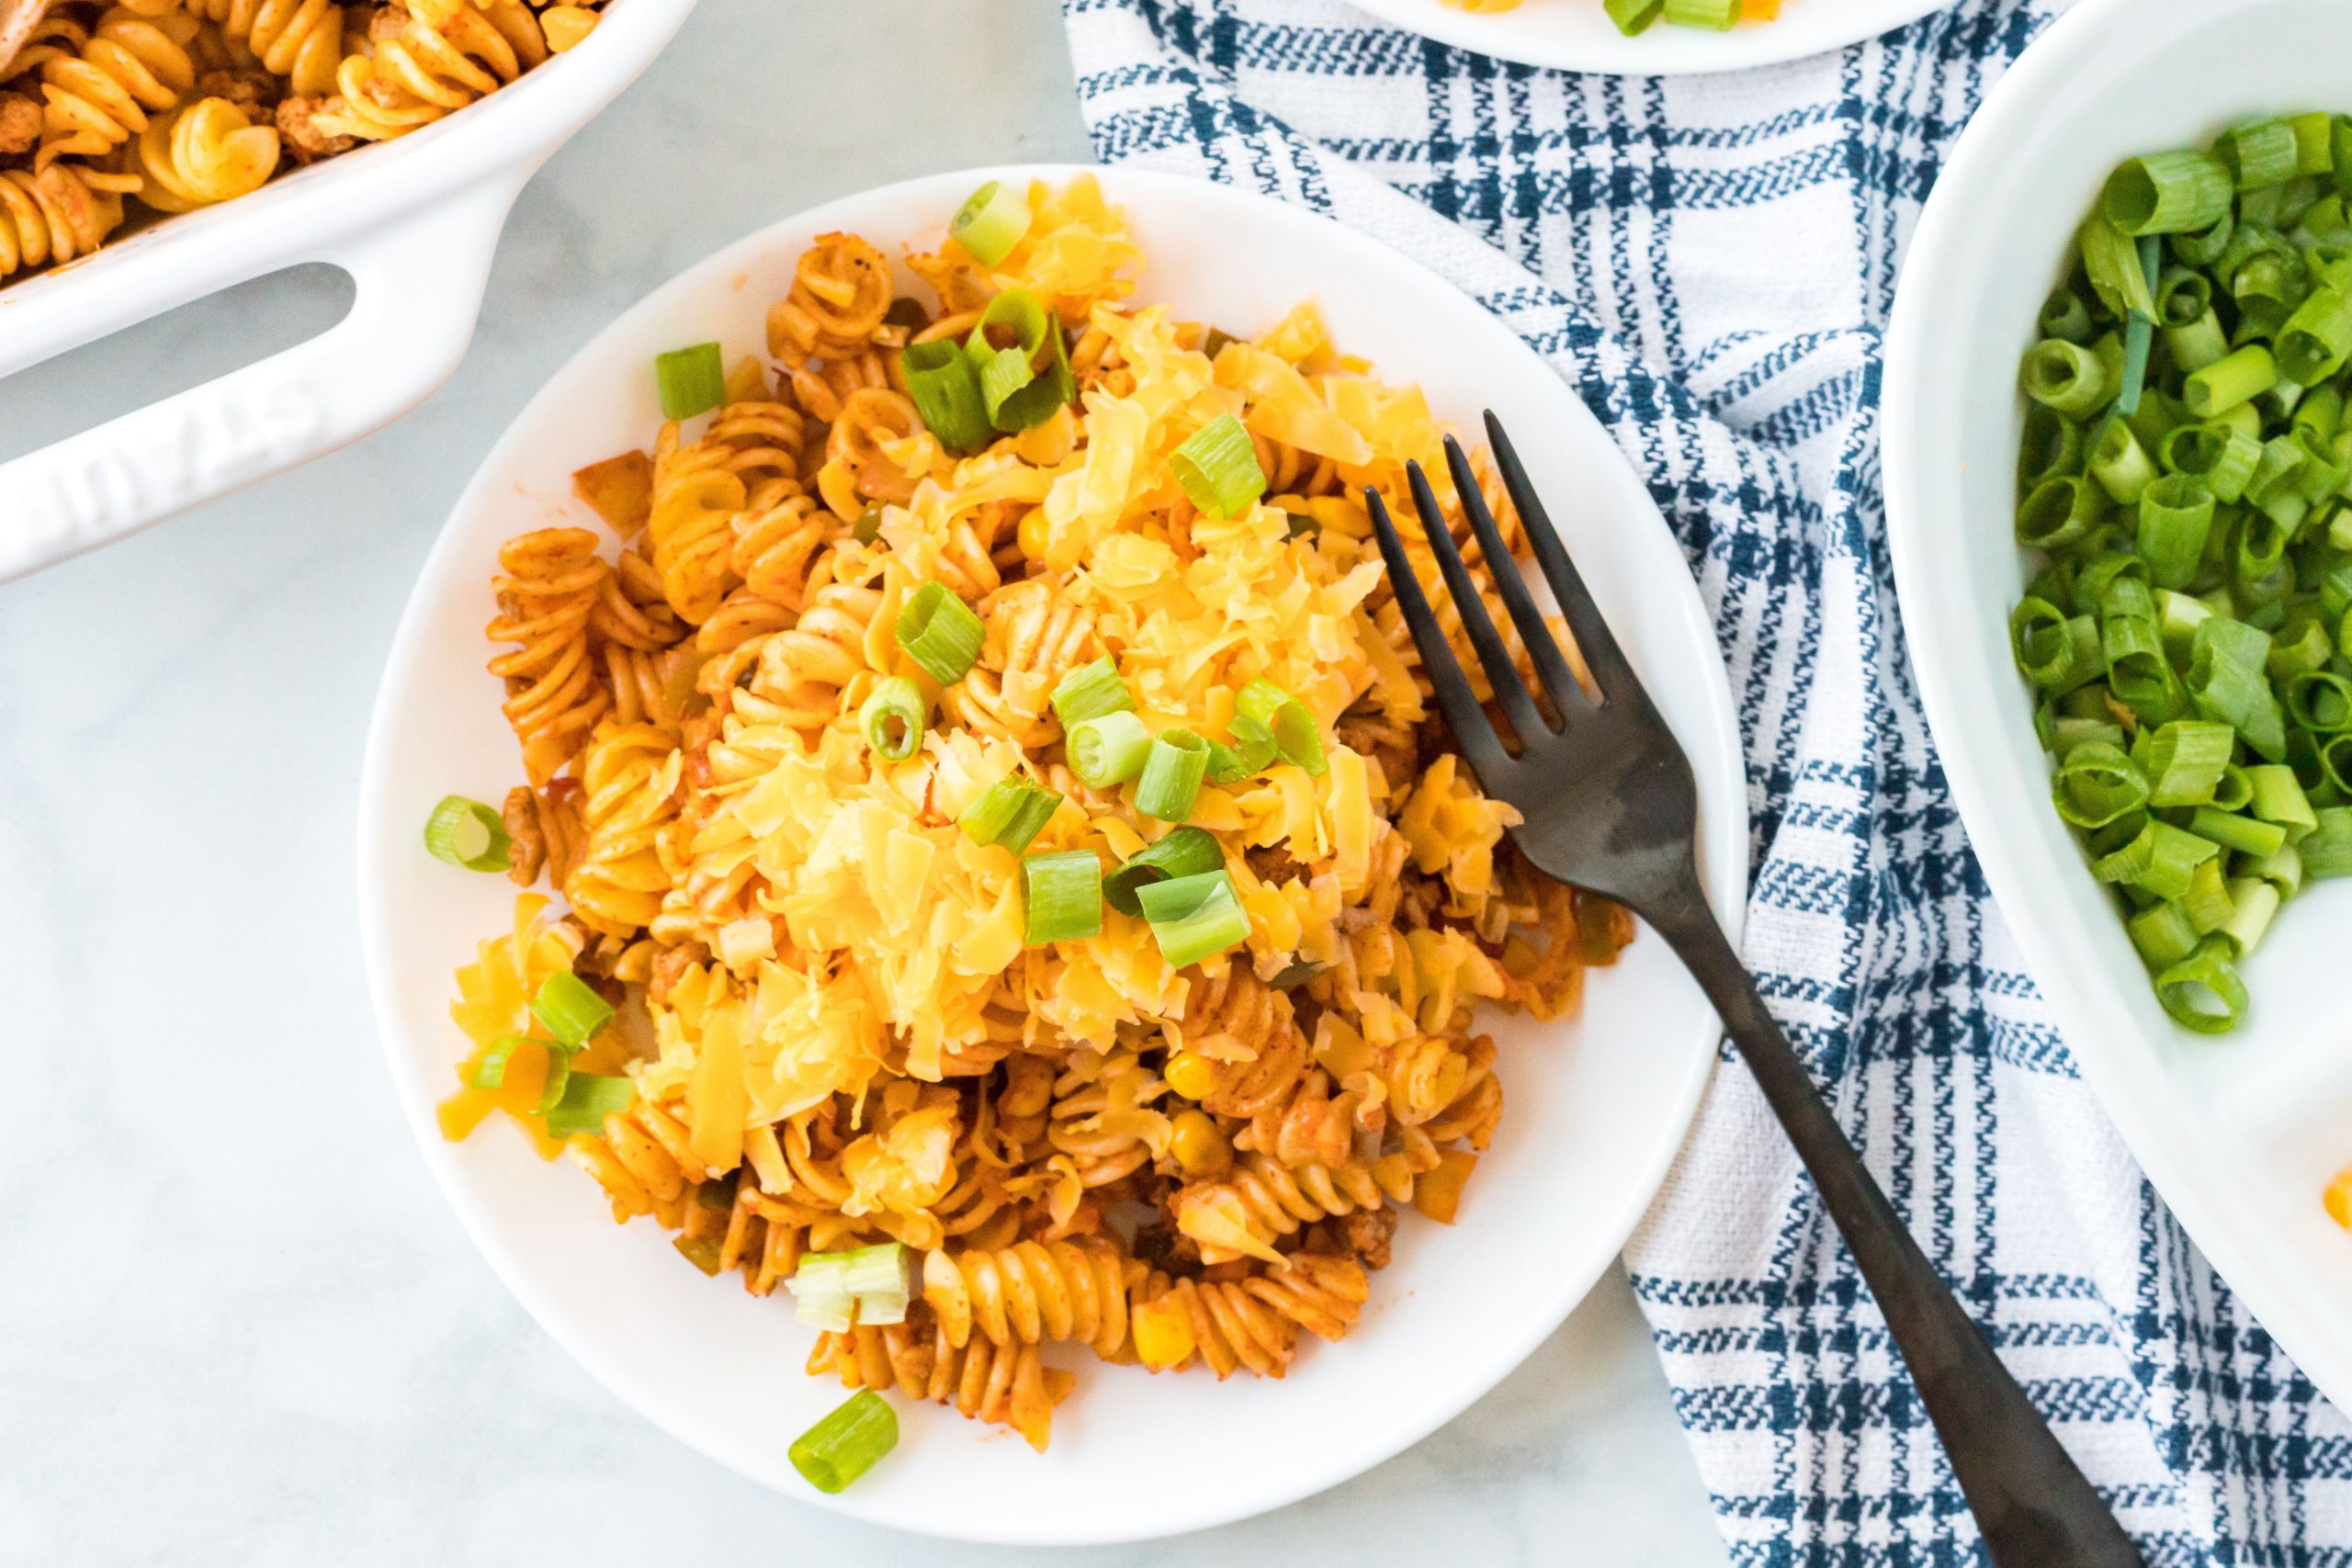 a serving of mexican pasta bake on a plate with a fork.